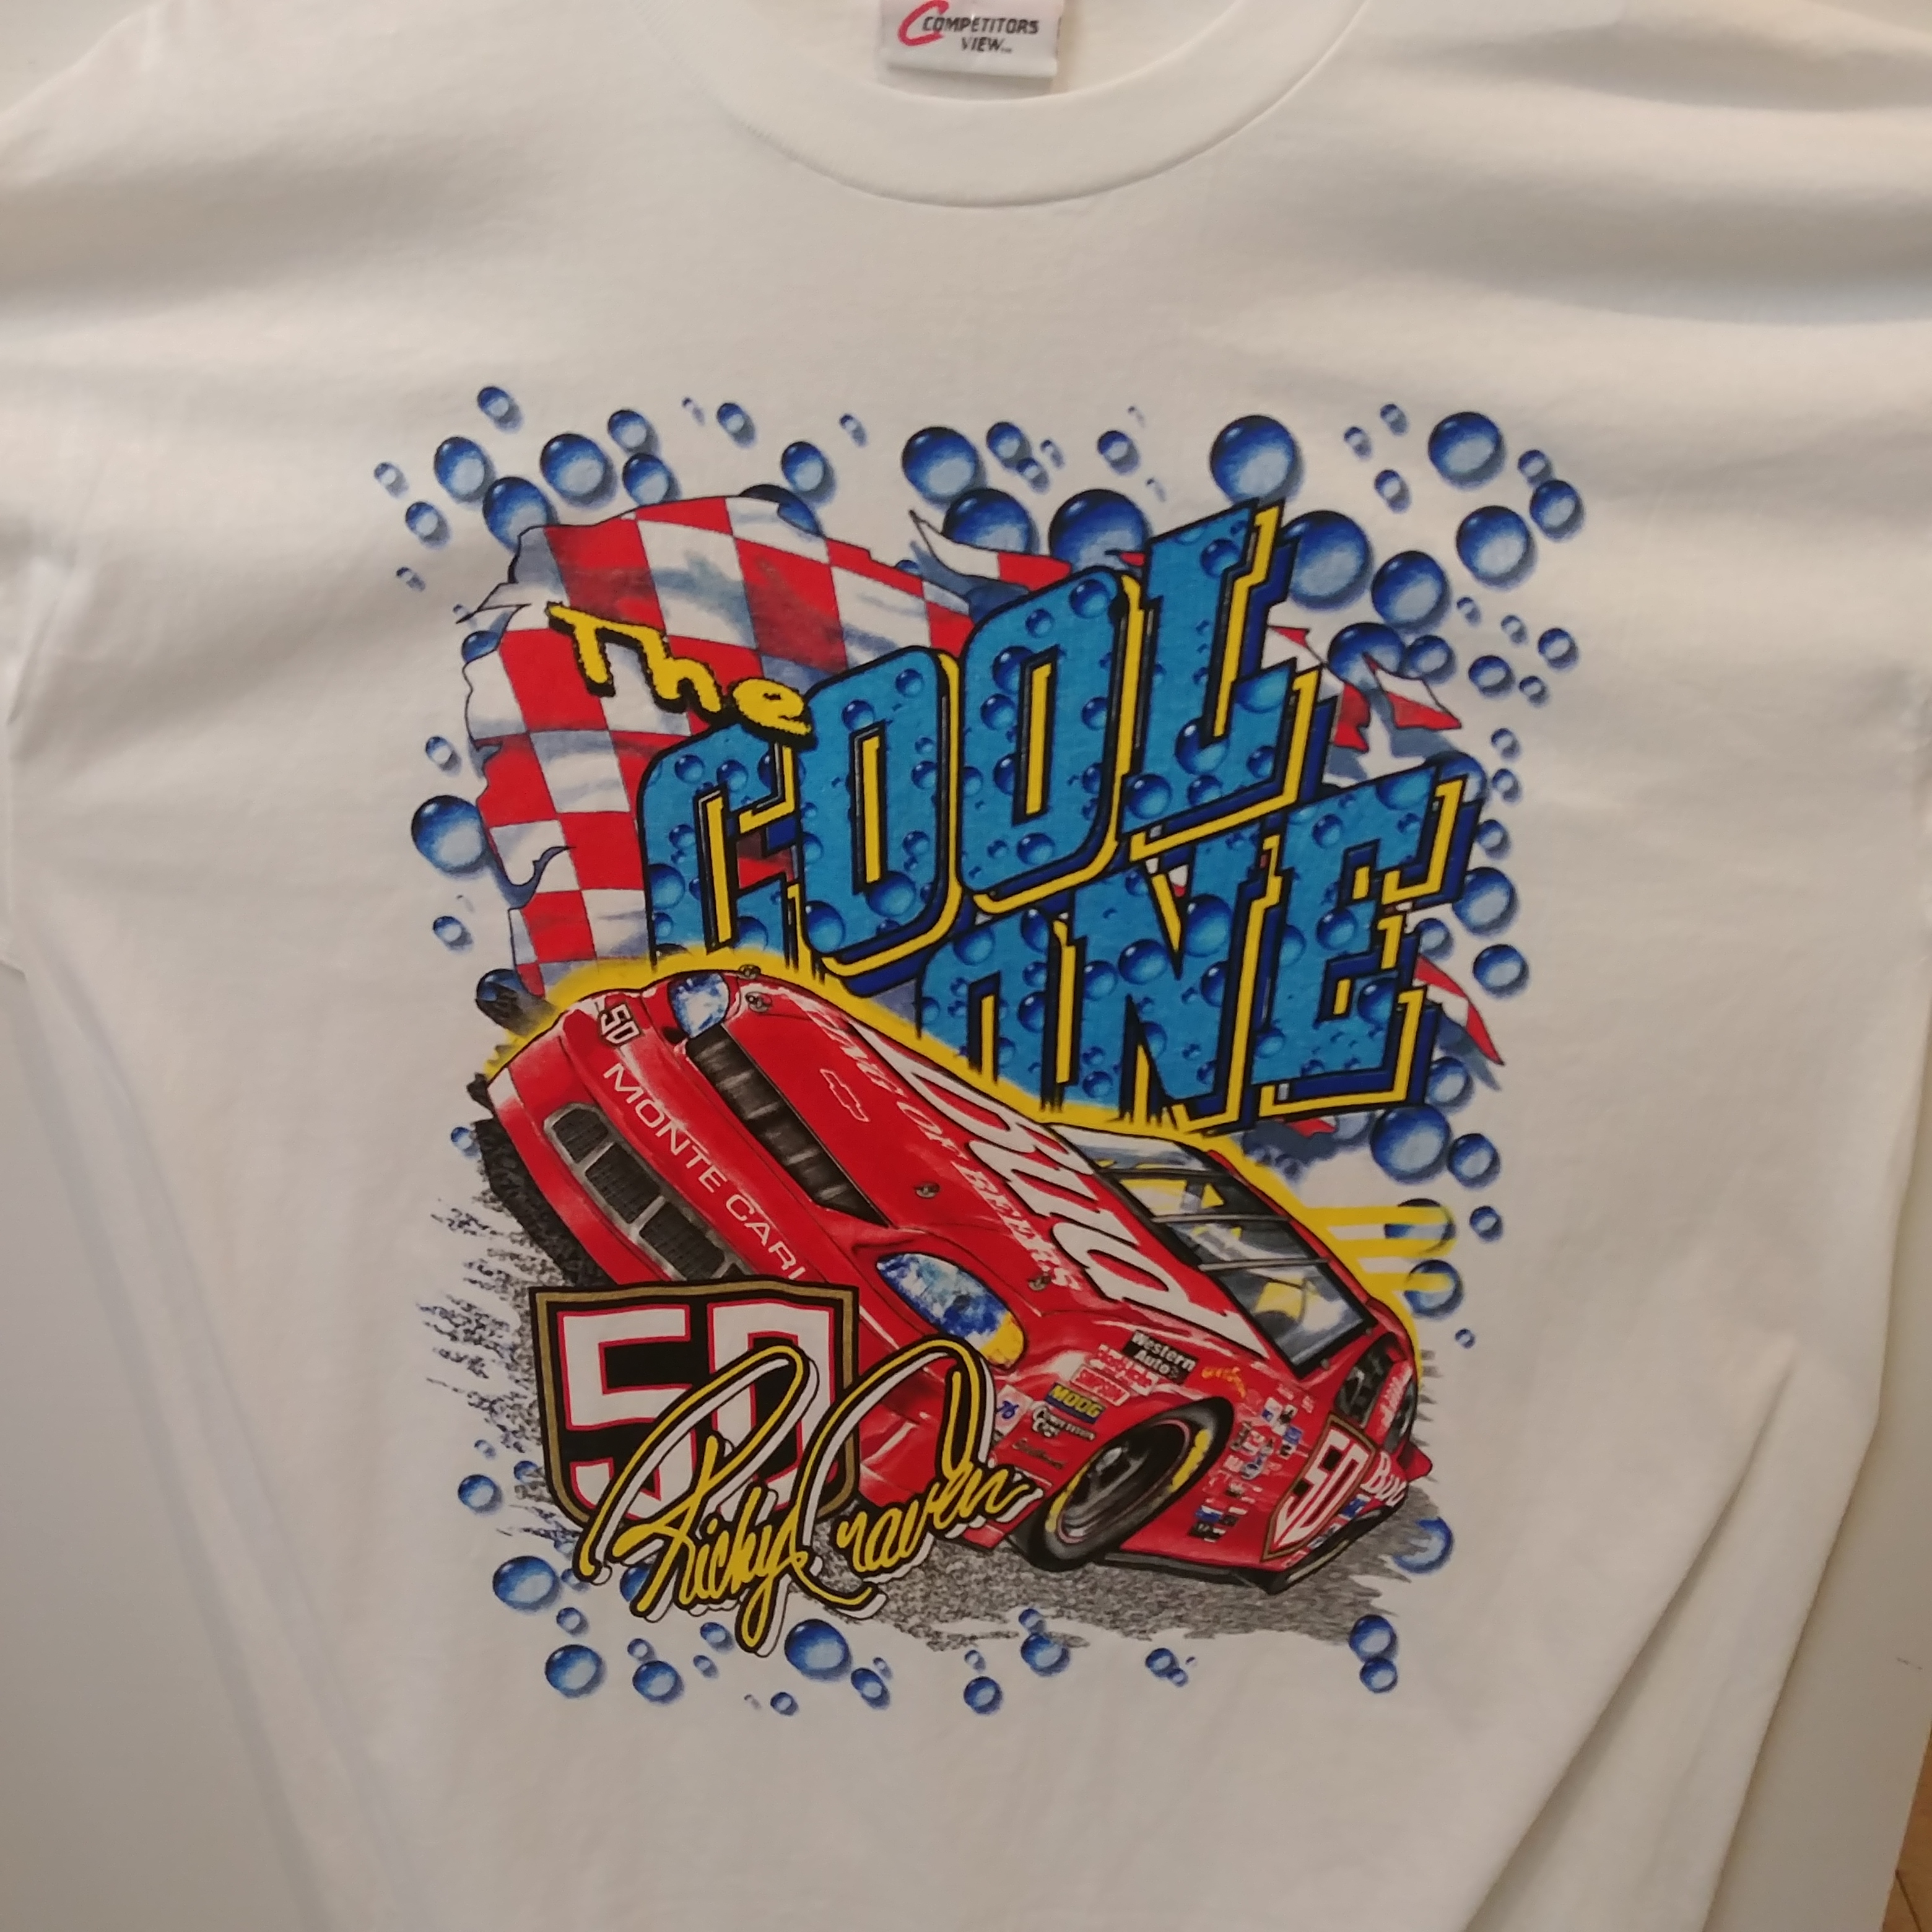 1998 Ricky Craven Budweiser "Cool One" tee